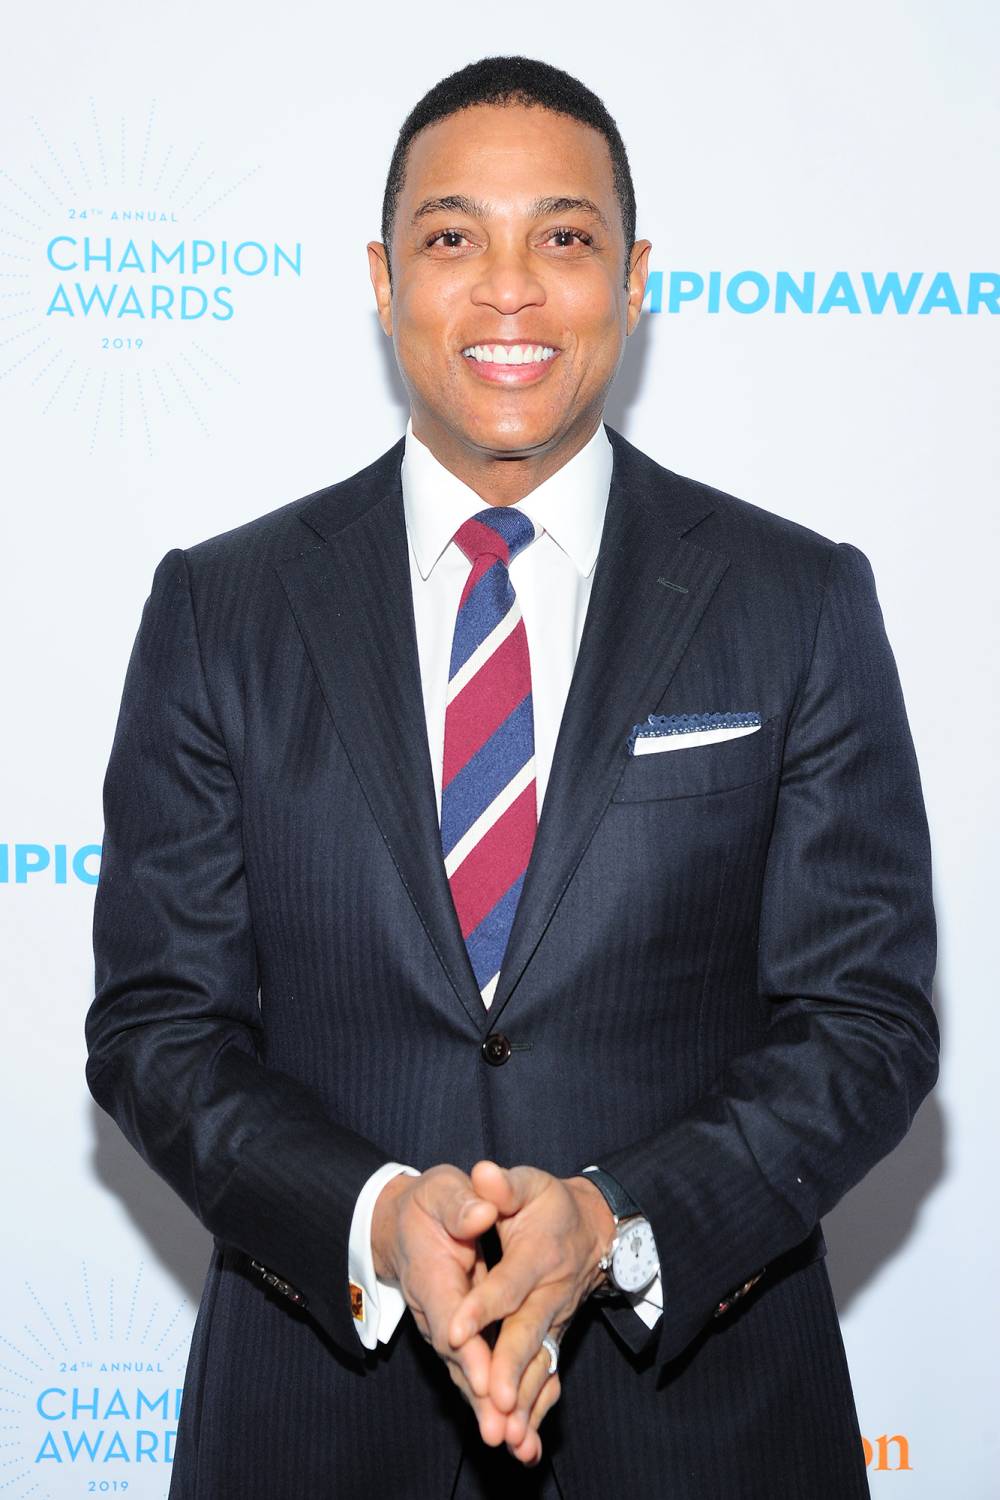 Don Lemon On Relationship With Tim Malone After Engagement